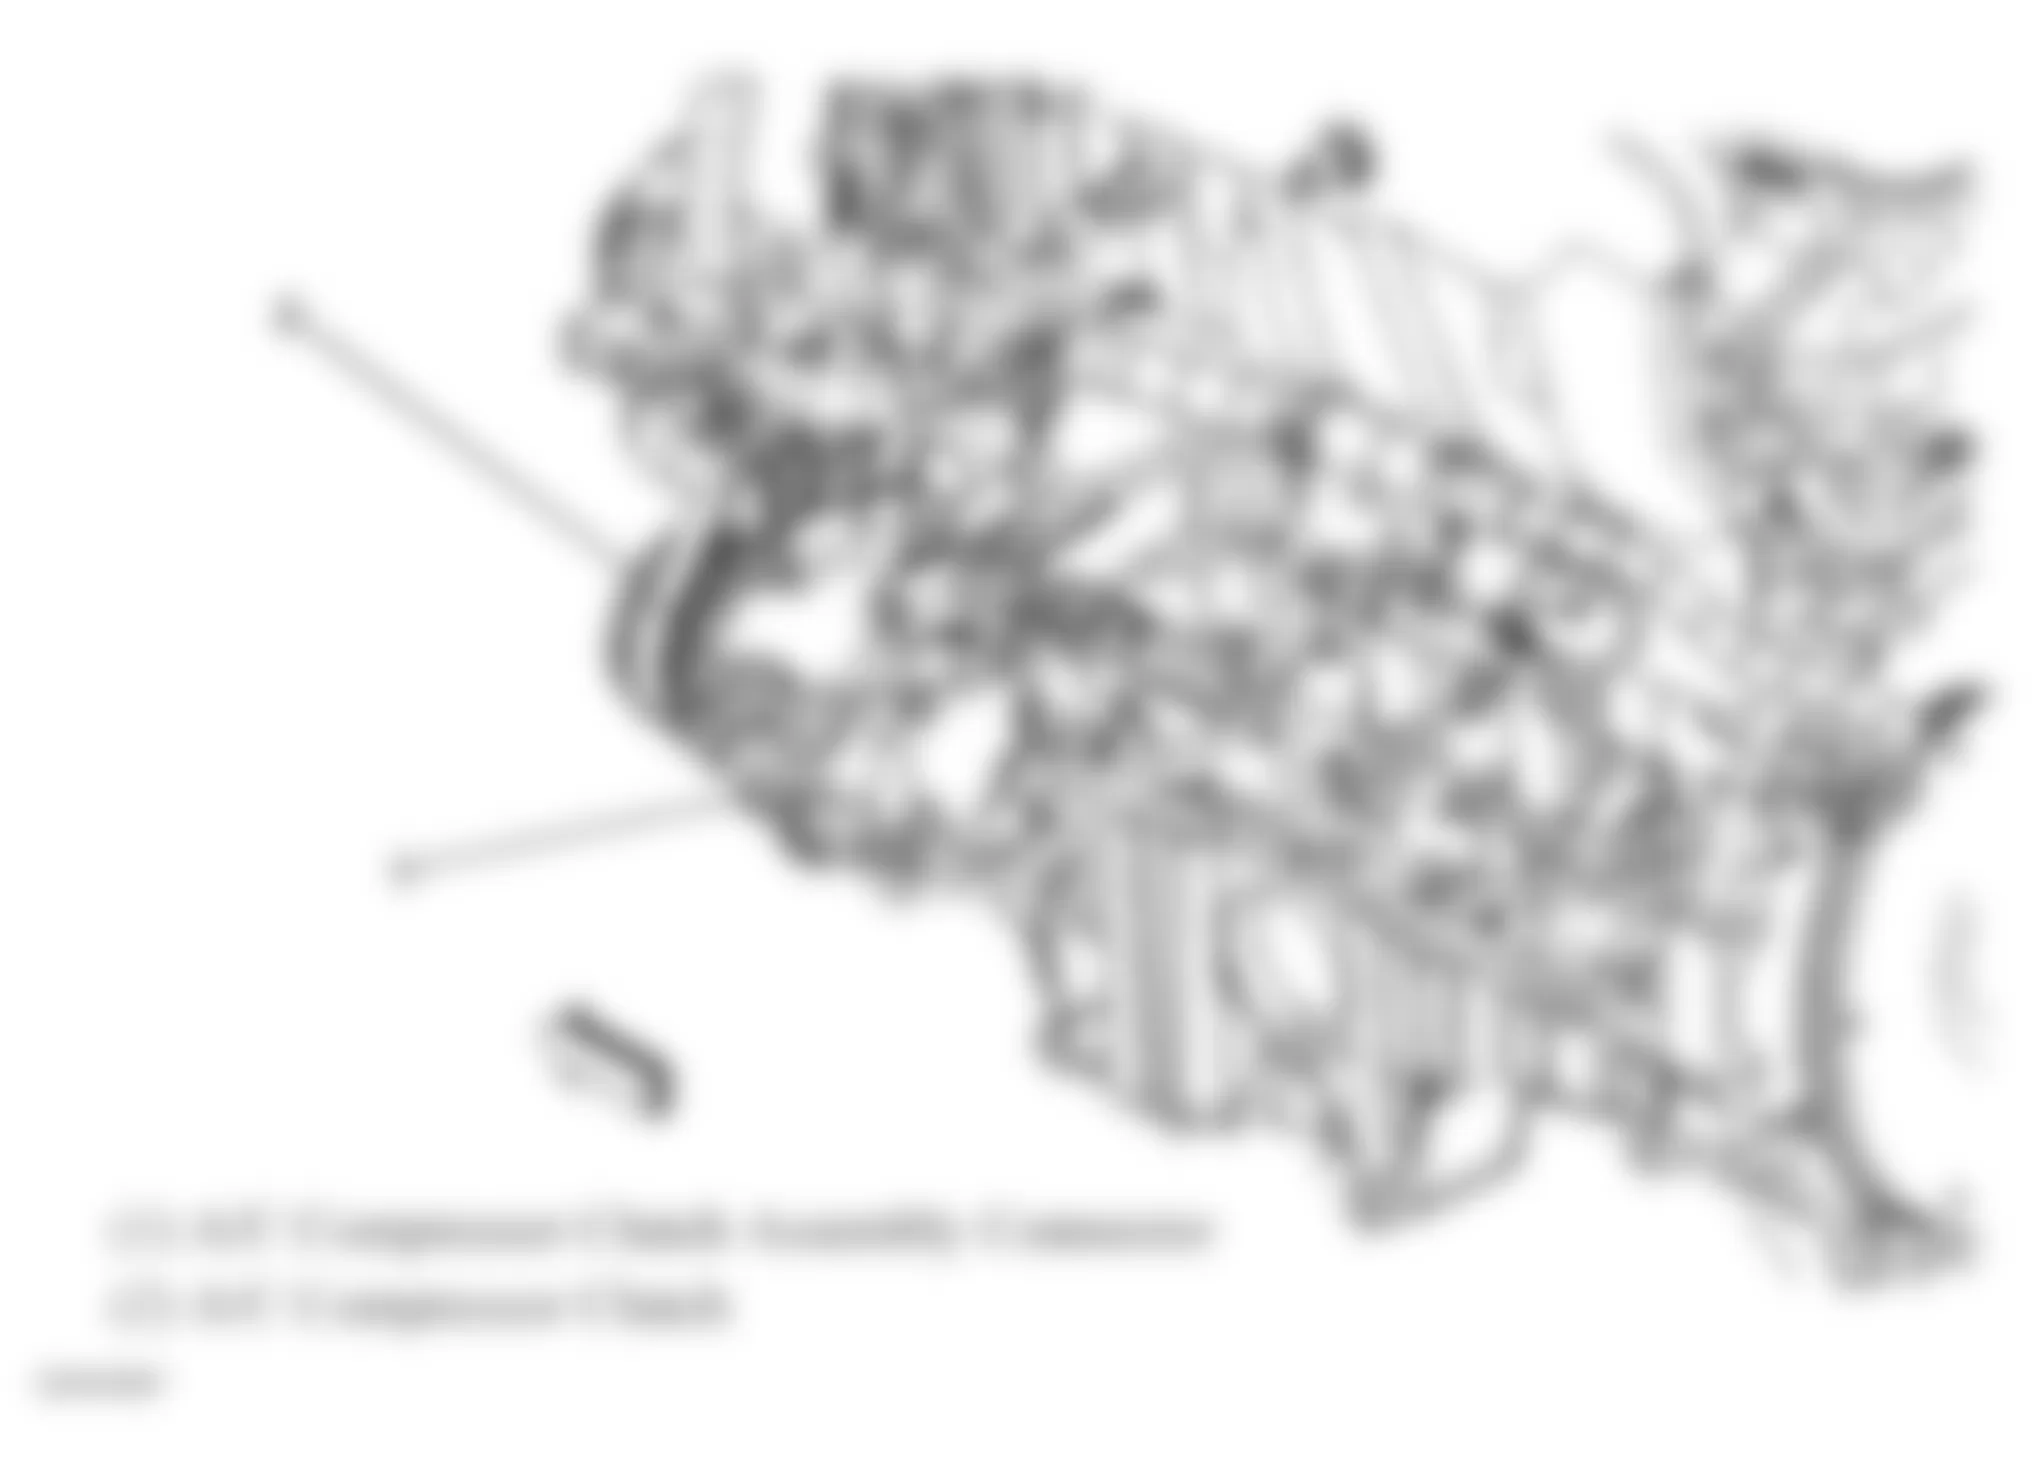 GMC Envoy 2007 - Component Locations -  Lower Left Side Of Engine (4.2L)